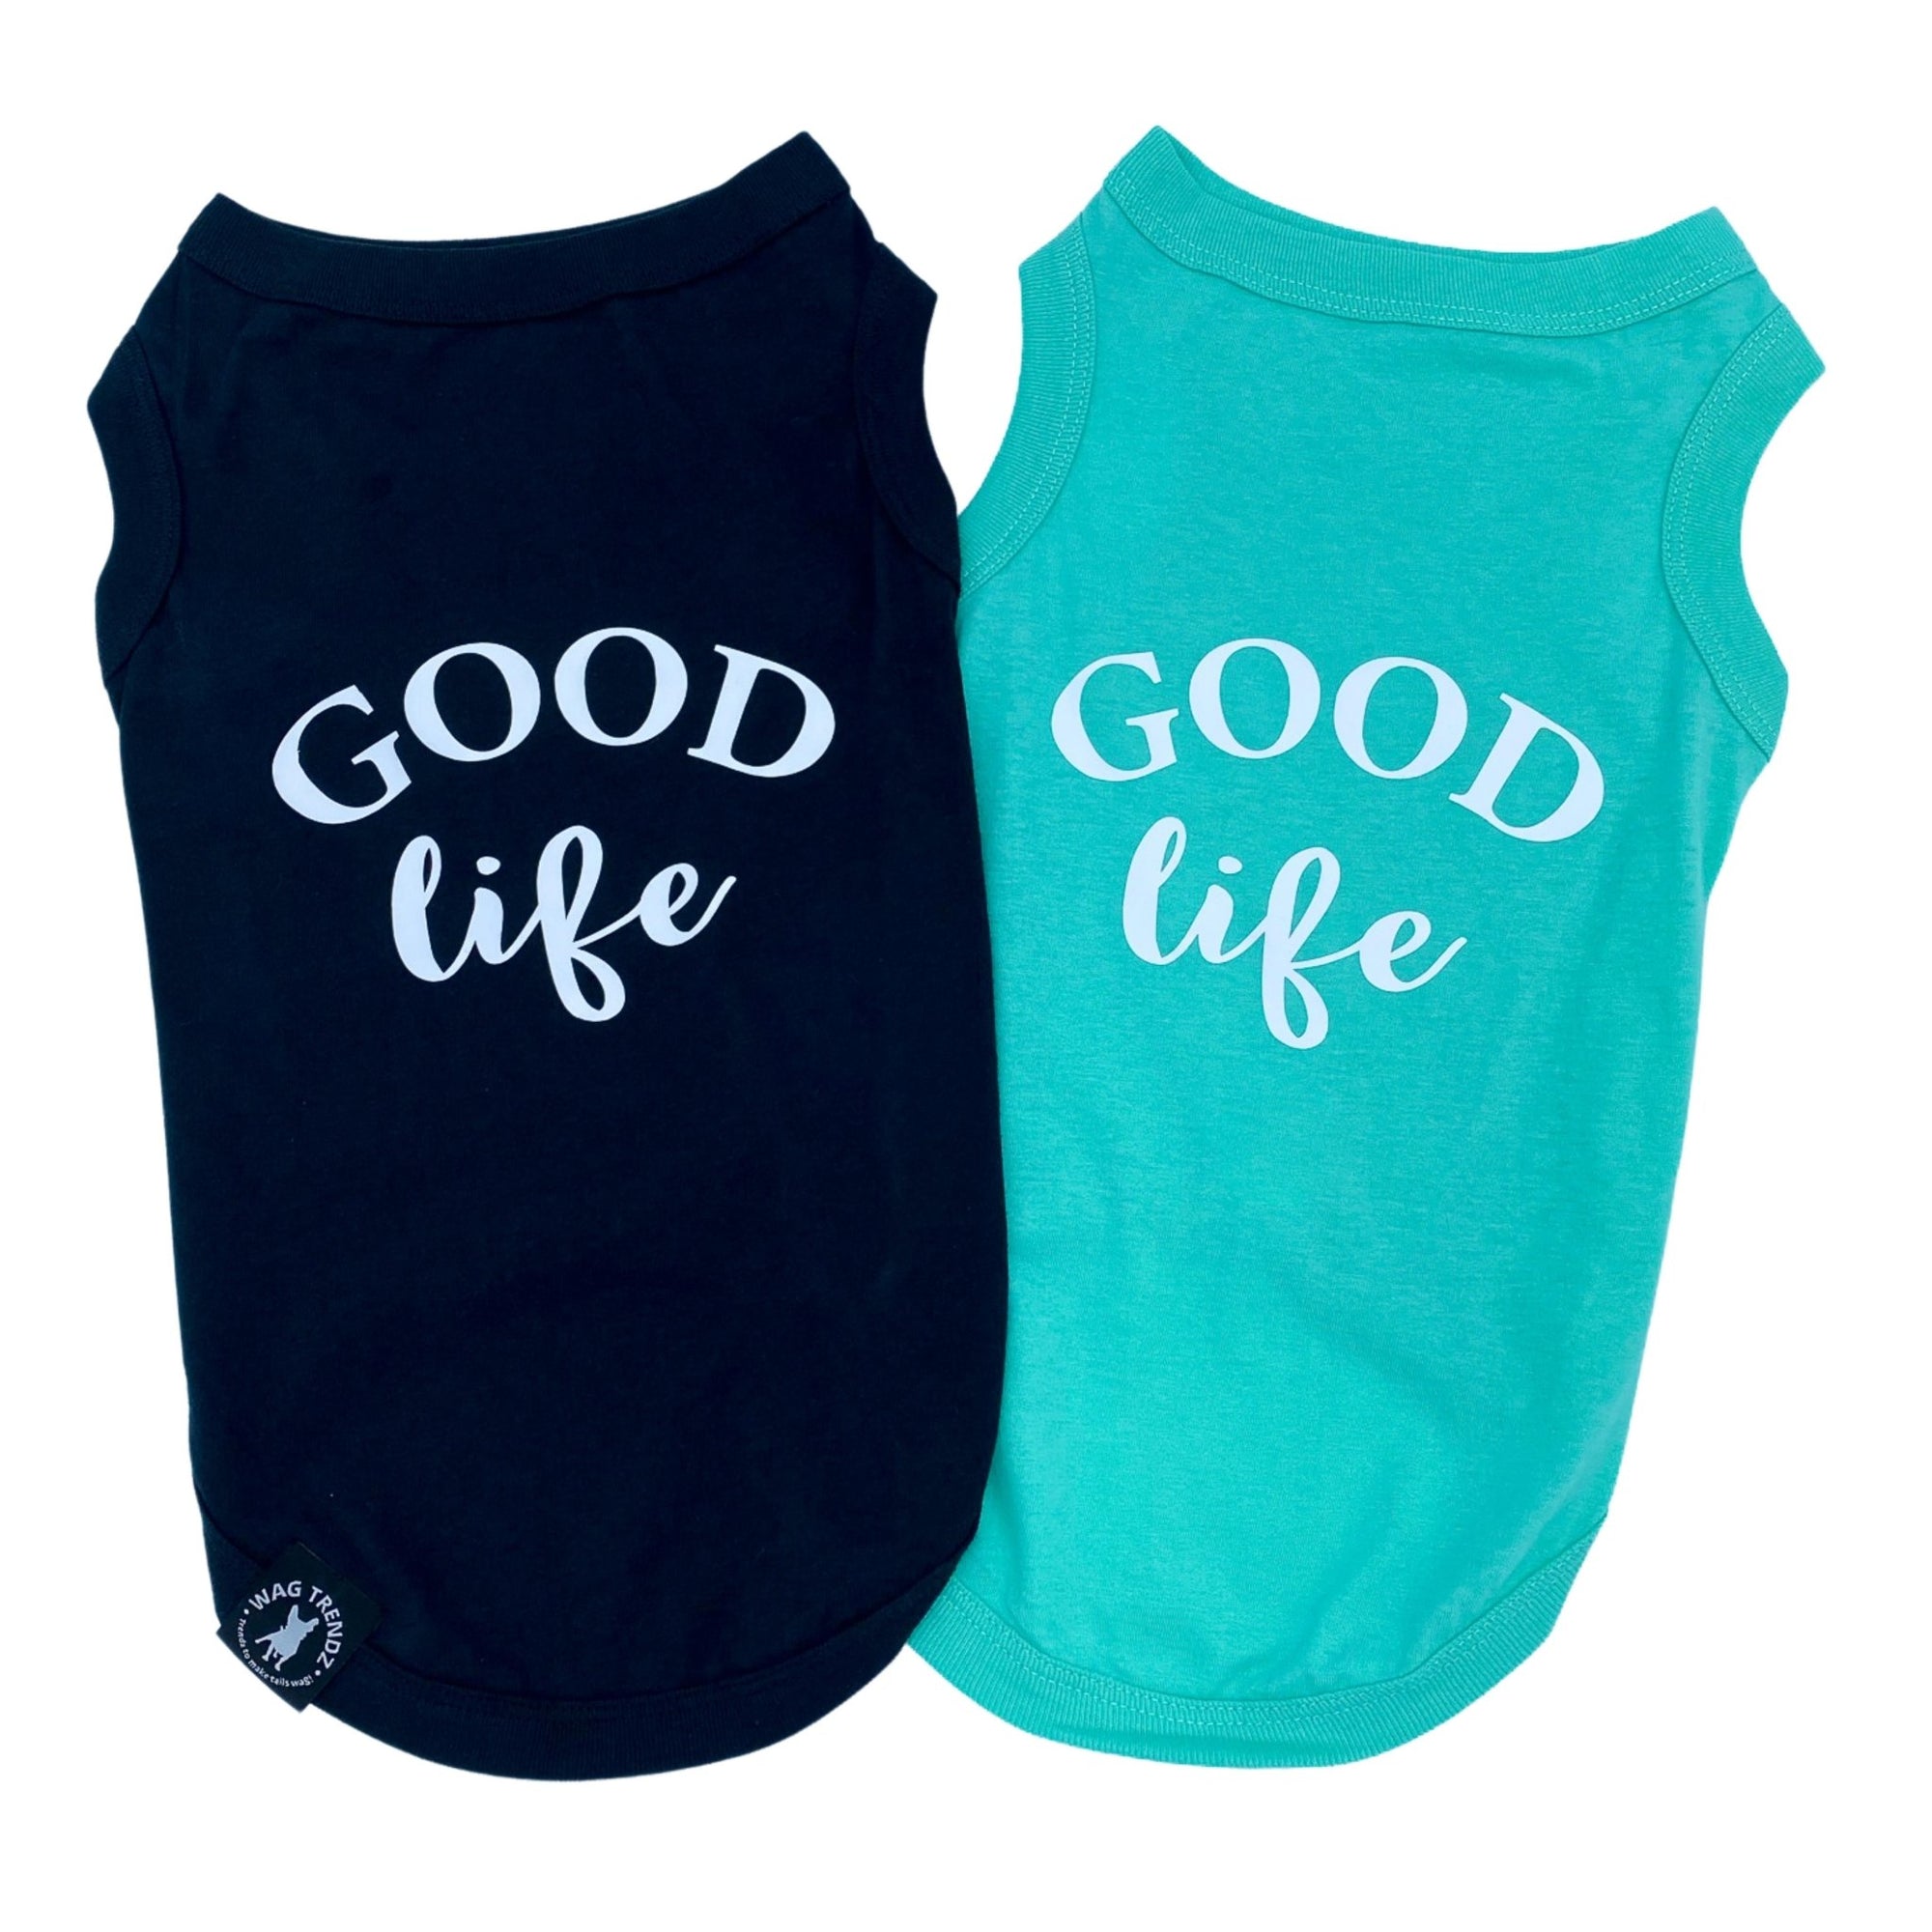 Dog T-Shirt - &quot;Good Life&quot; - Black and Teal - back view with the words Good Life in white lettering - against a solid white background - Wag Trendz